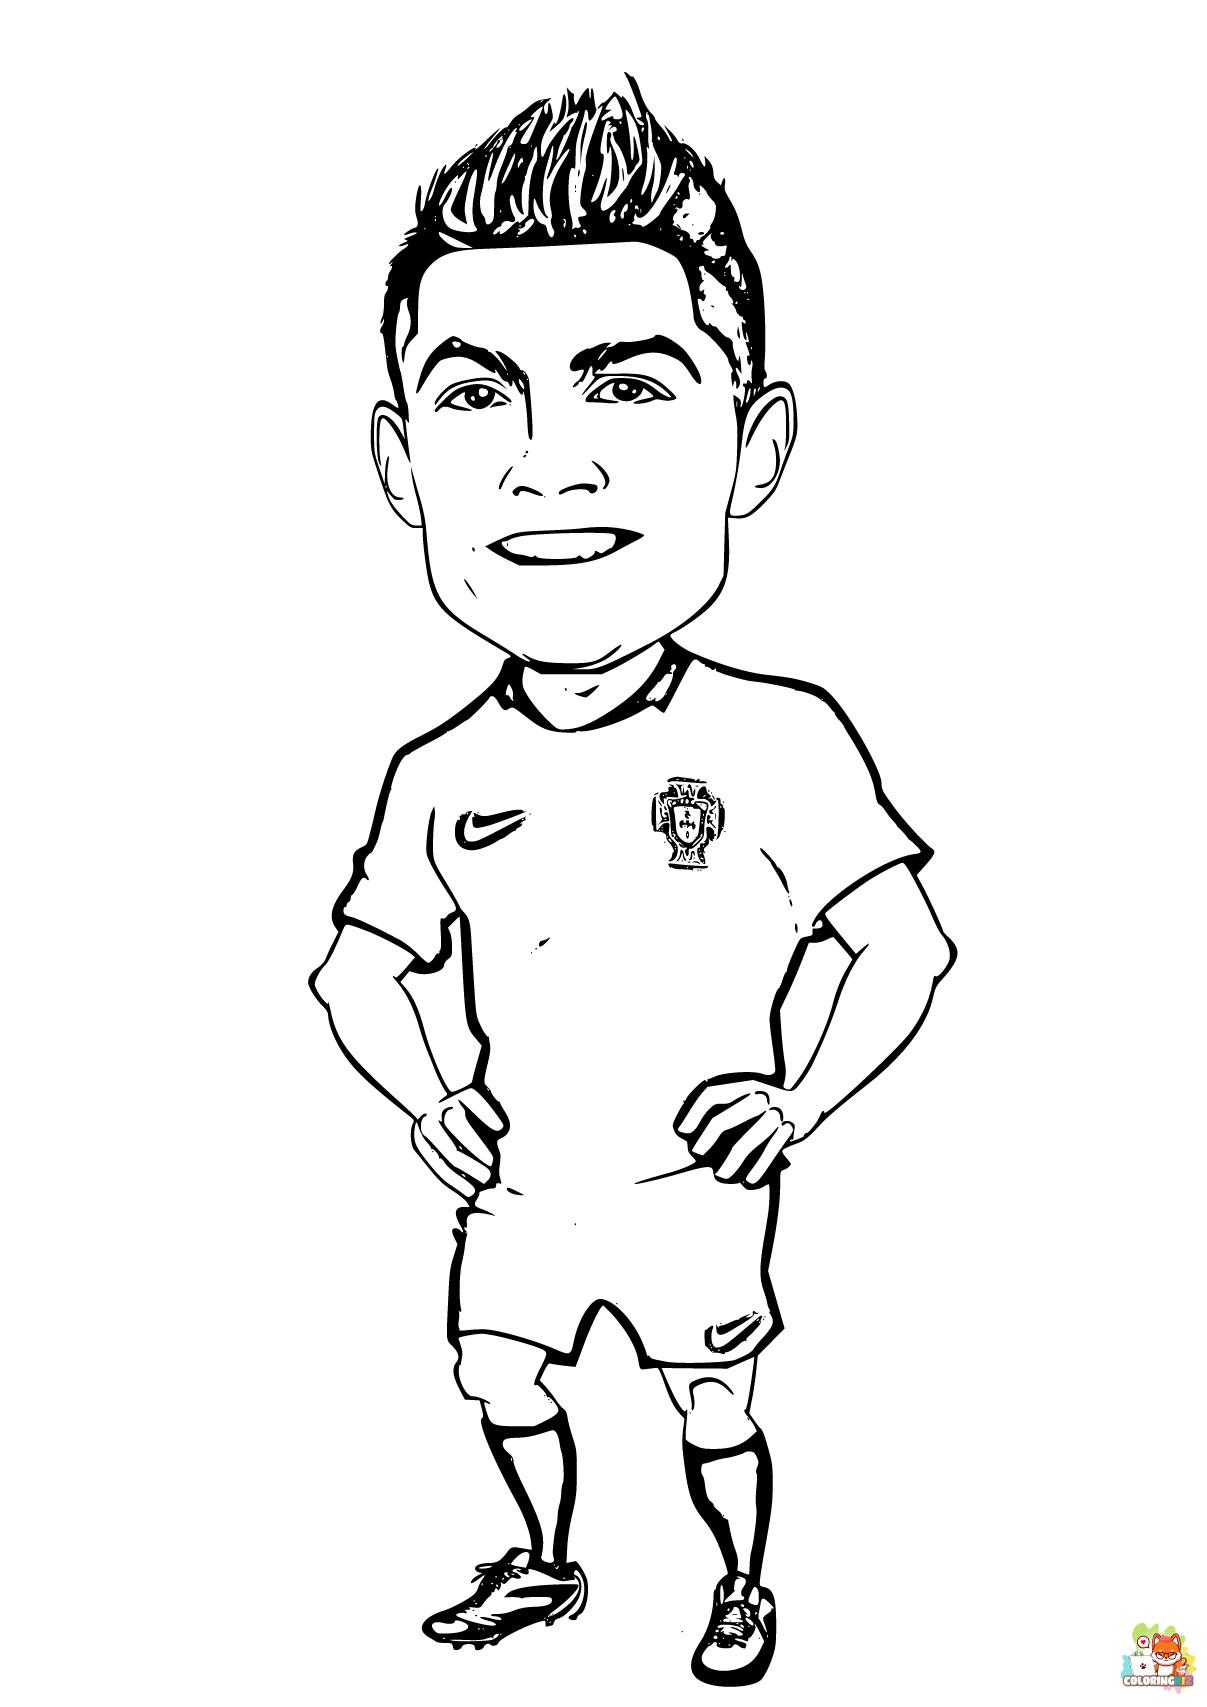 Cristiano Ronaldo coloring pages free